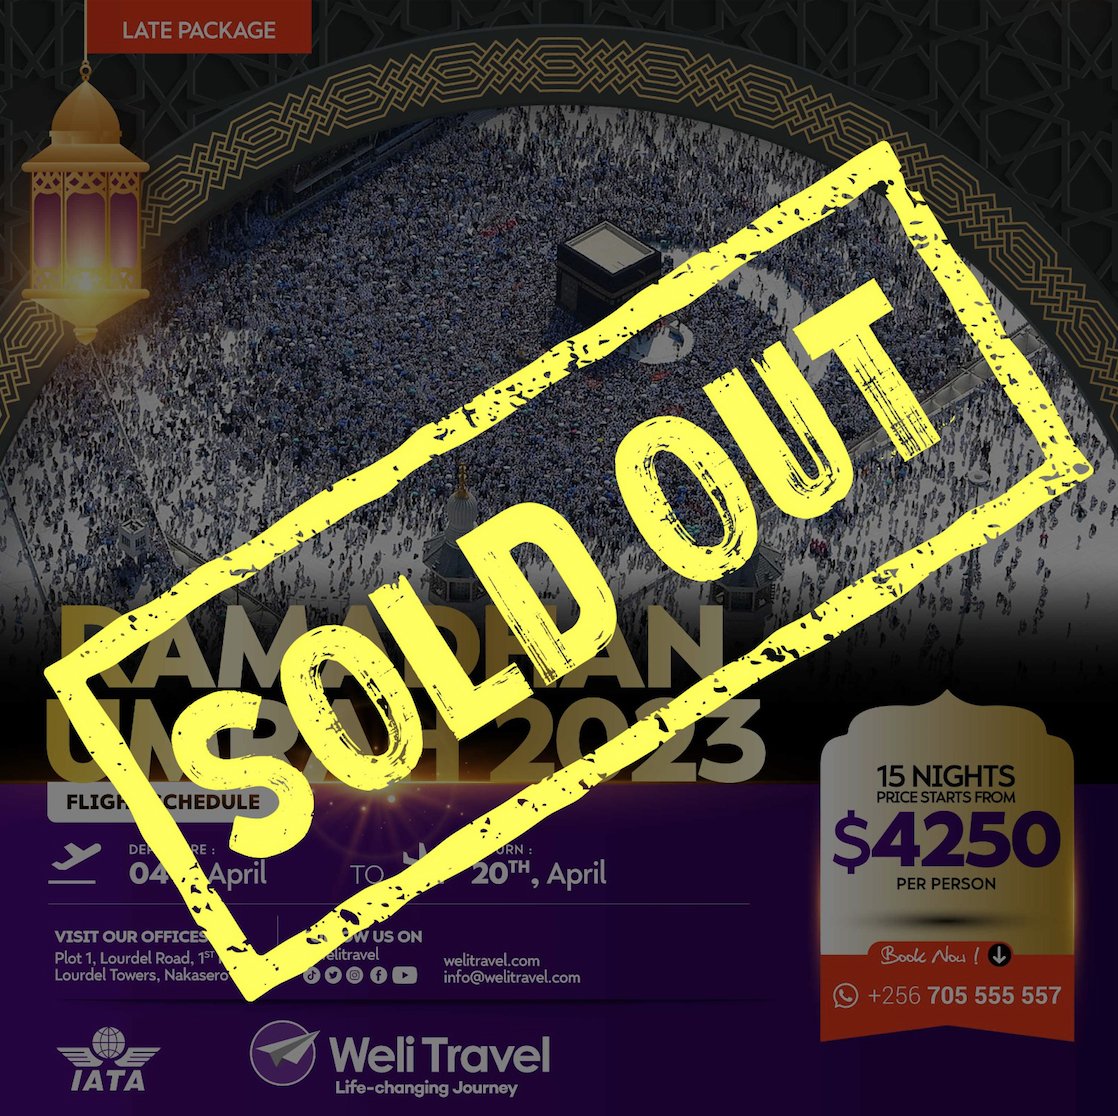 AD: Please note that slots for RAMADAN Umrah Package from Weli Travel are now SOLD OUT. Thank you for choosing Weli Travel, the leading Hajj & Umrah agency in Uganda.

For inquiries on your travel solutions, call/WhatsApp at +256705555557 #lifechangingjourney #WeliTravel